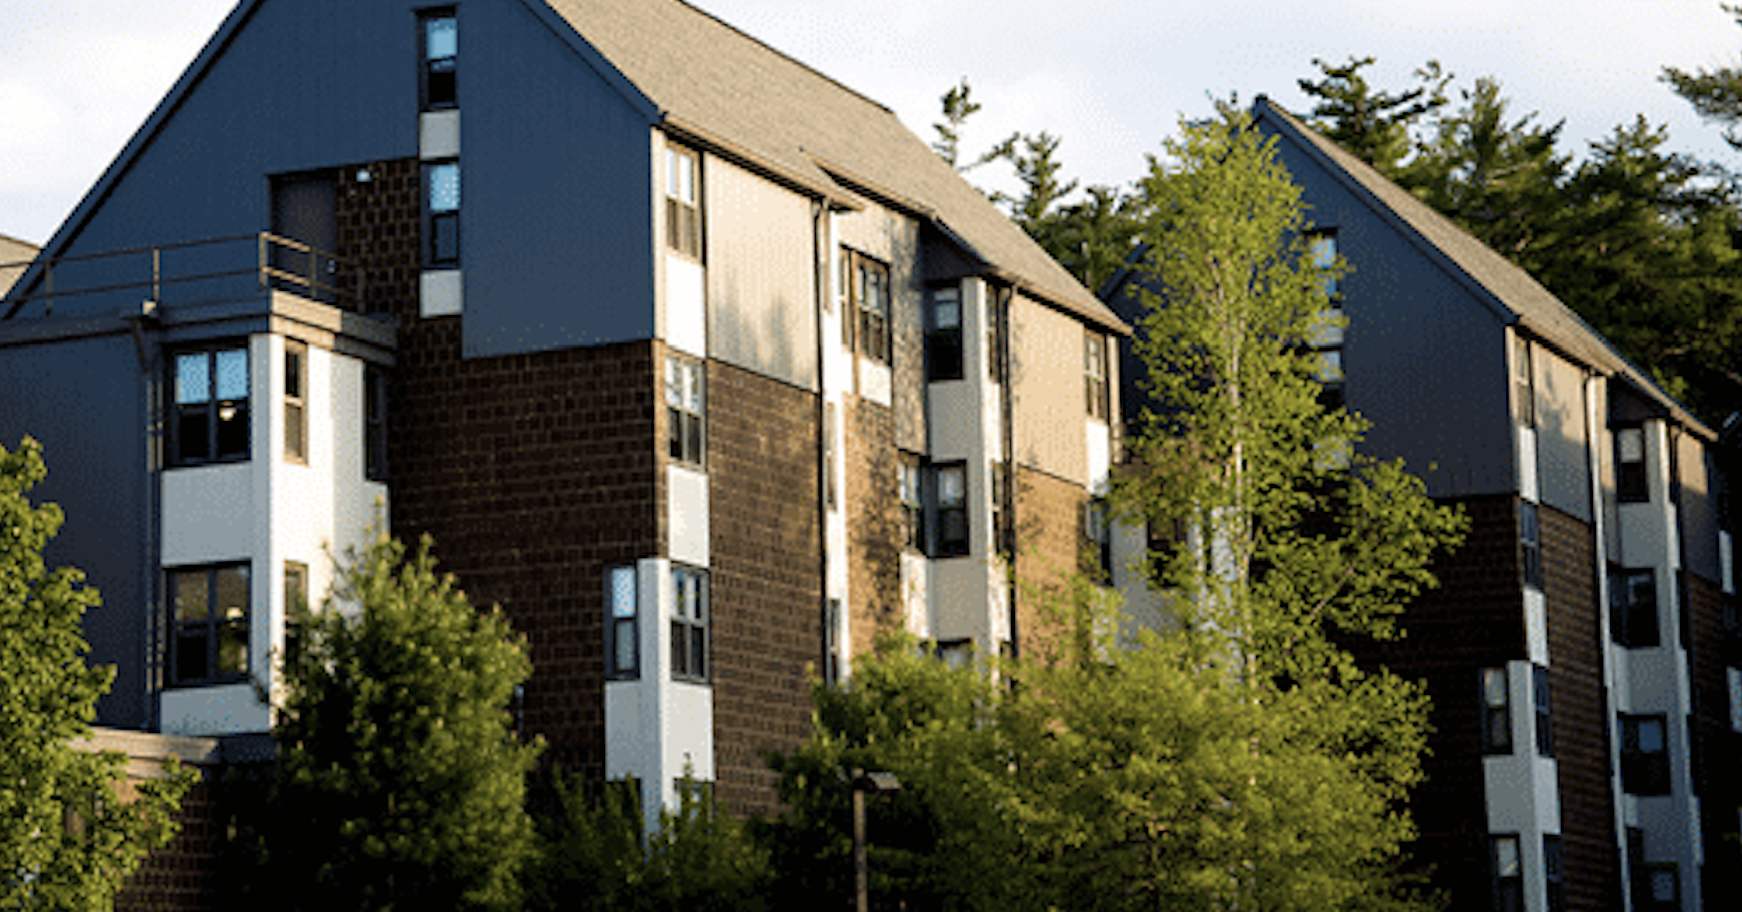 A Glimpse At the Residence Halls